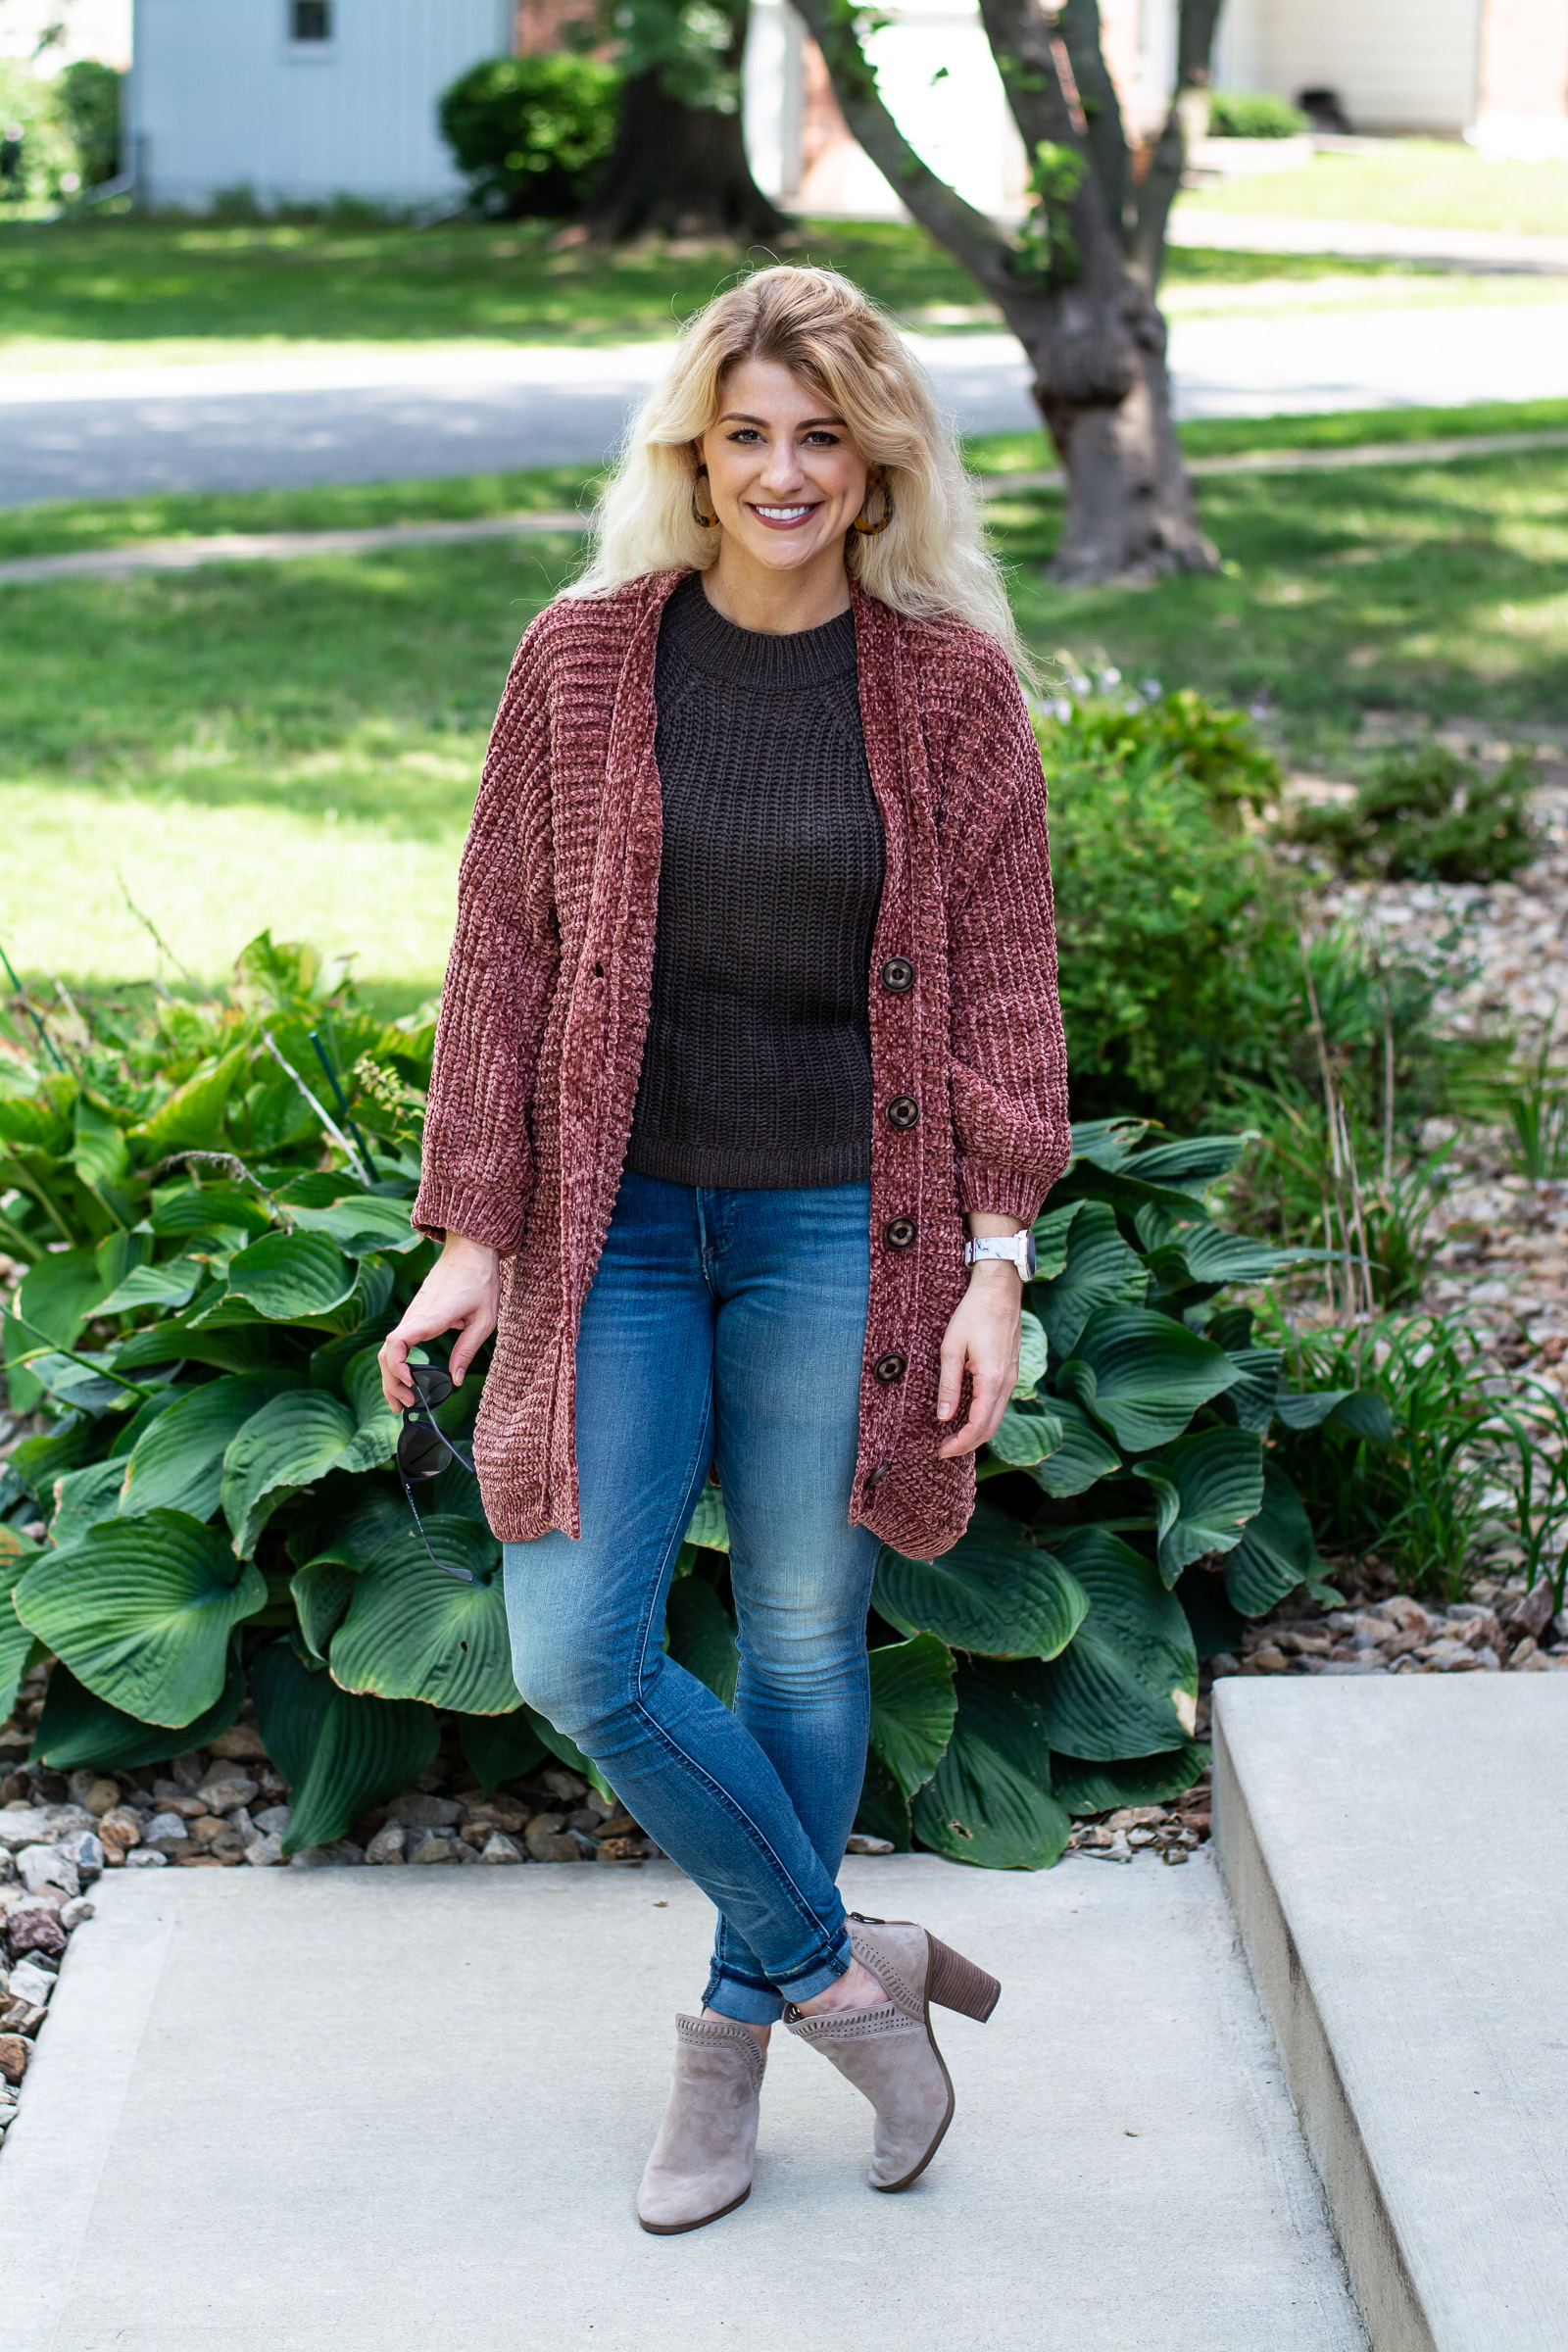 Transitional Outfit: Summer Sweater + Ankle Boots. | Ashley from LSR